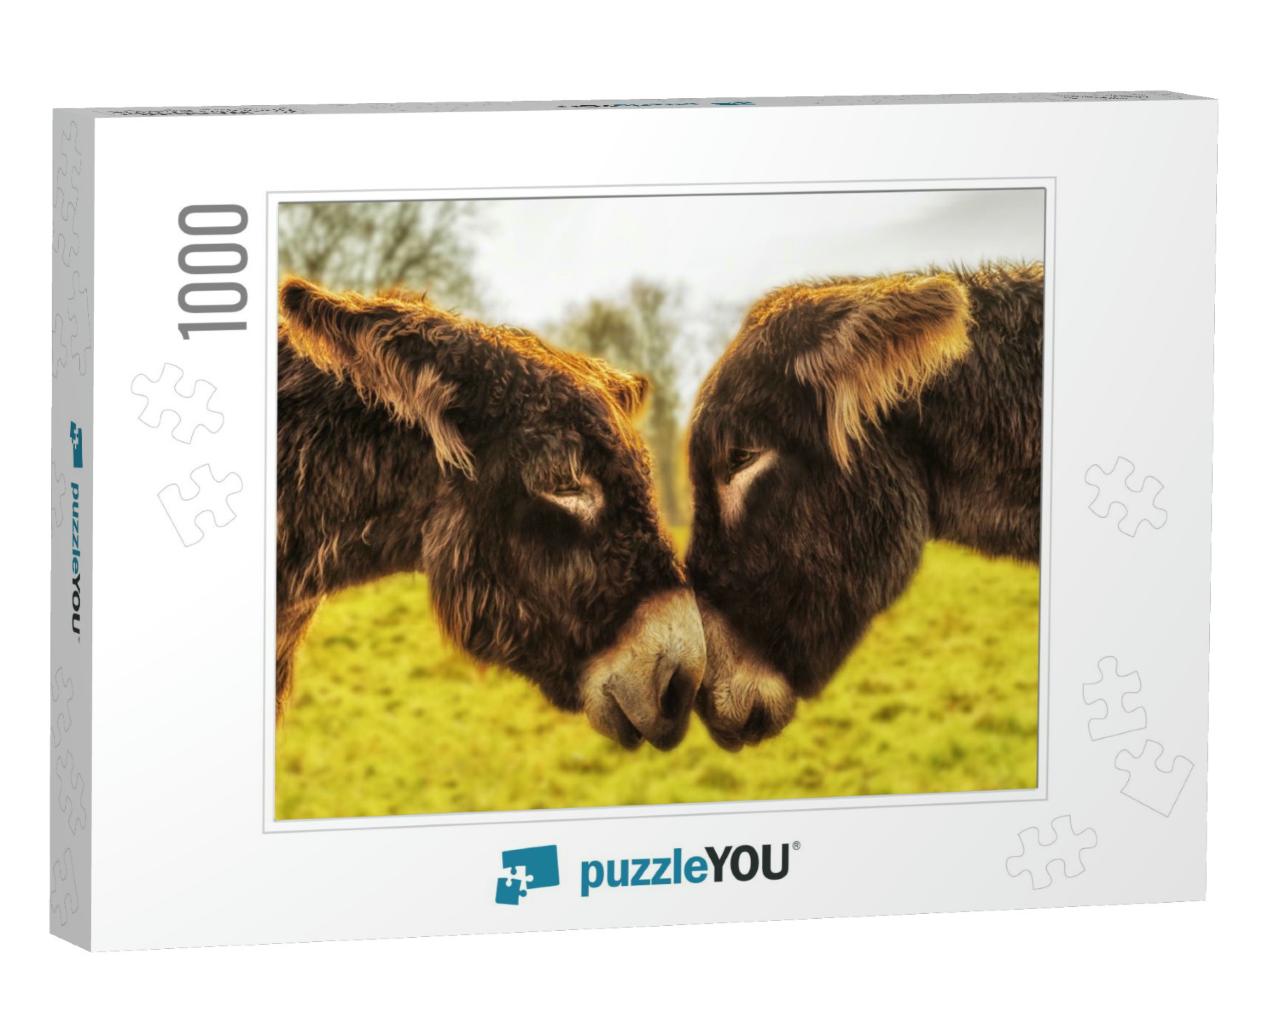 A Pair of Donkeys Looks Into Their Eyes... Jigsaw Puzzle with 1000 pieces